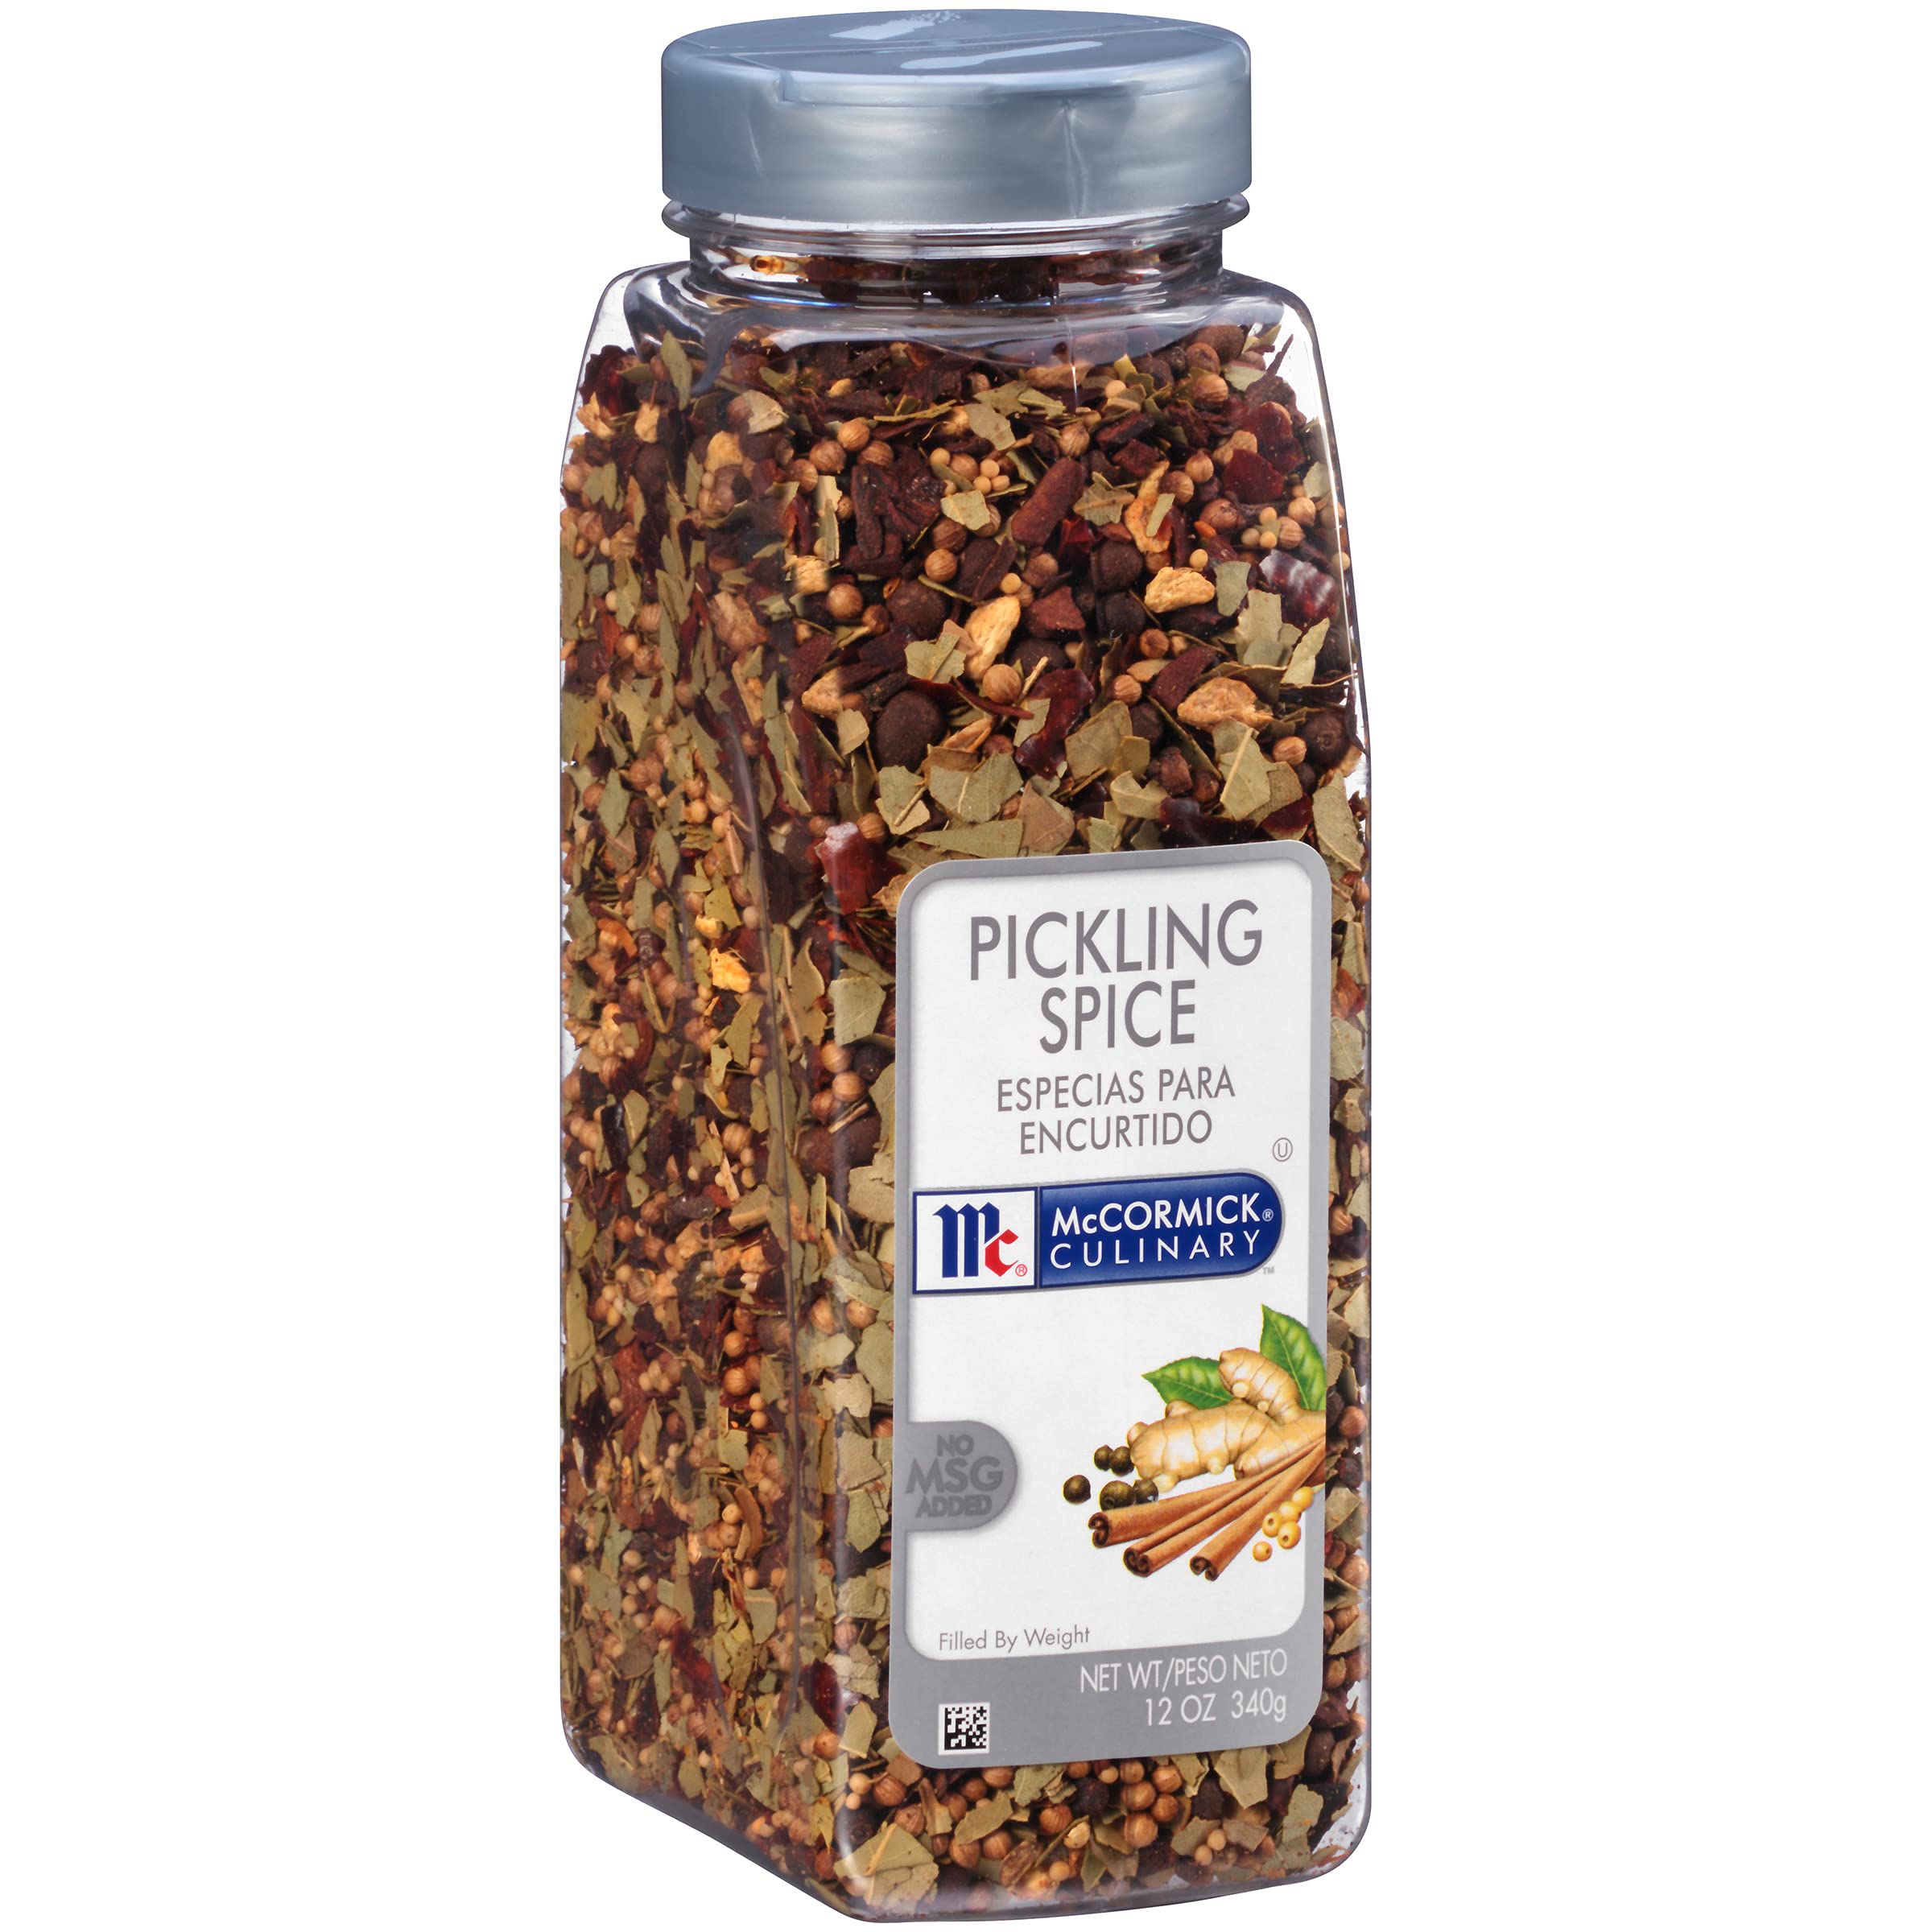 Mccormick culinary Pickling Spice 12 oz - One 12 Ounce container of Mixed Pickling Spice Best for Seasoning Pickles corned Beef 